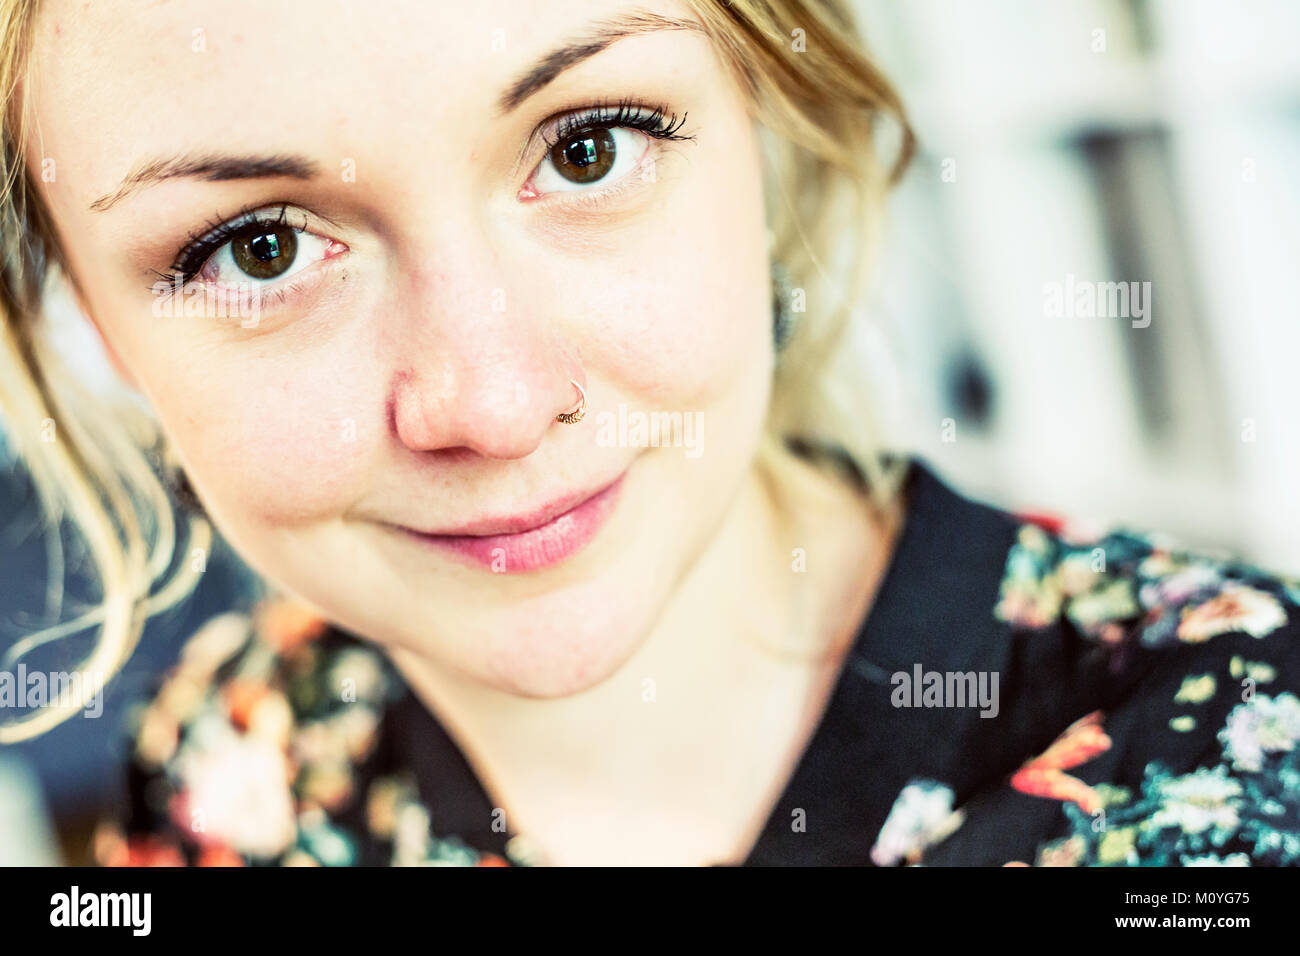 Young woman with nose piercing,portrait,Germany Stock Photo